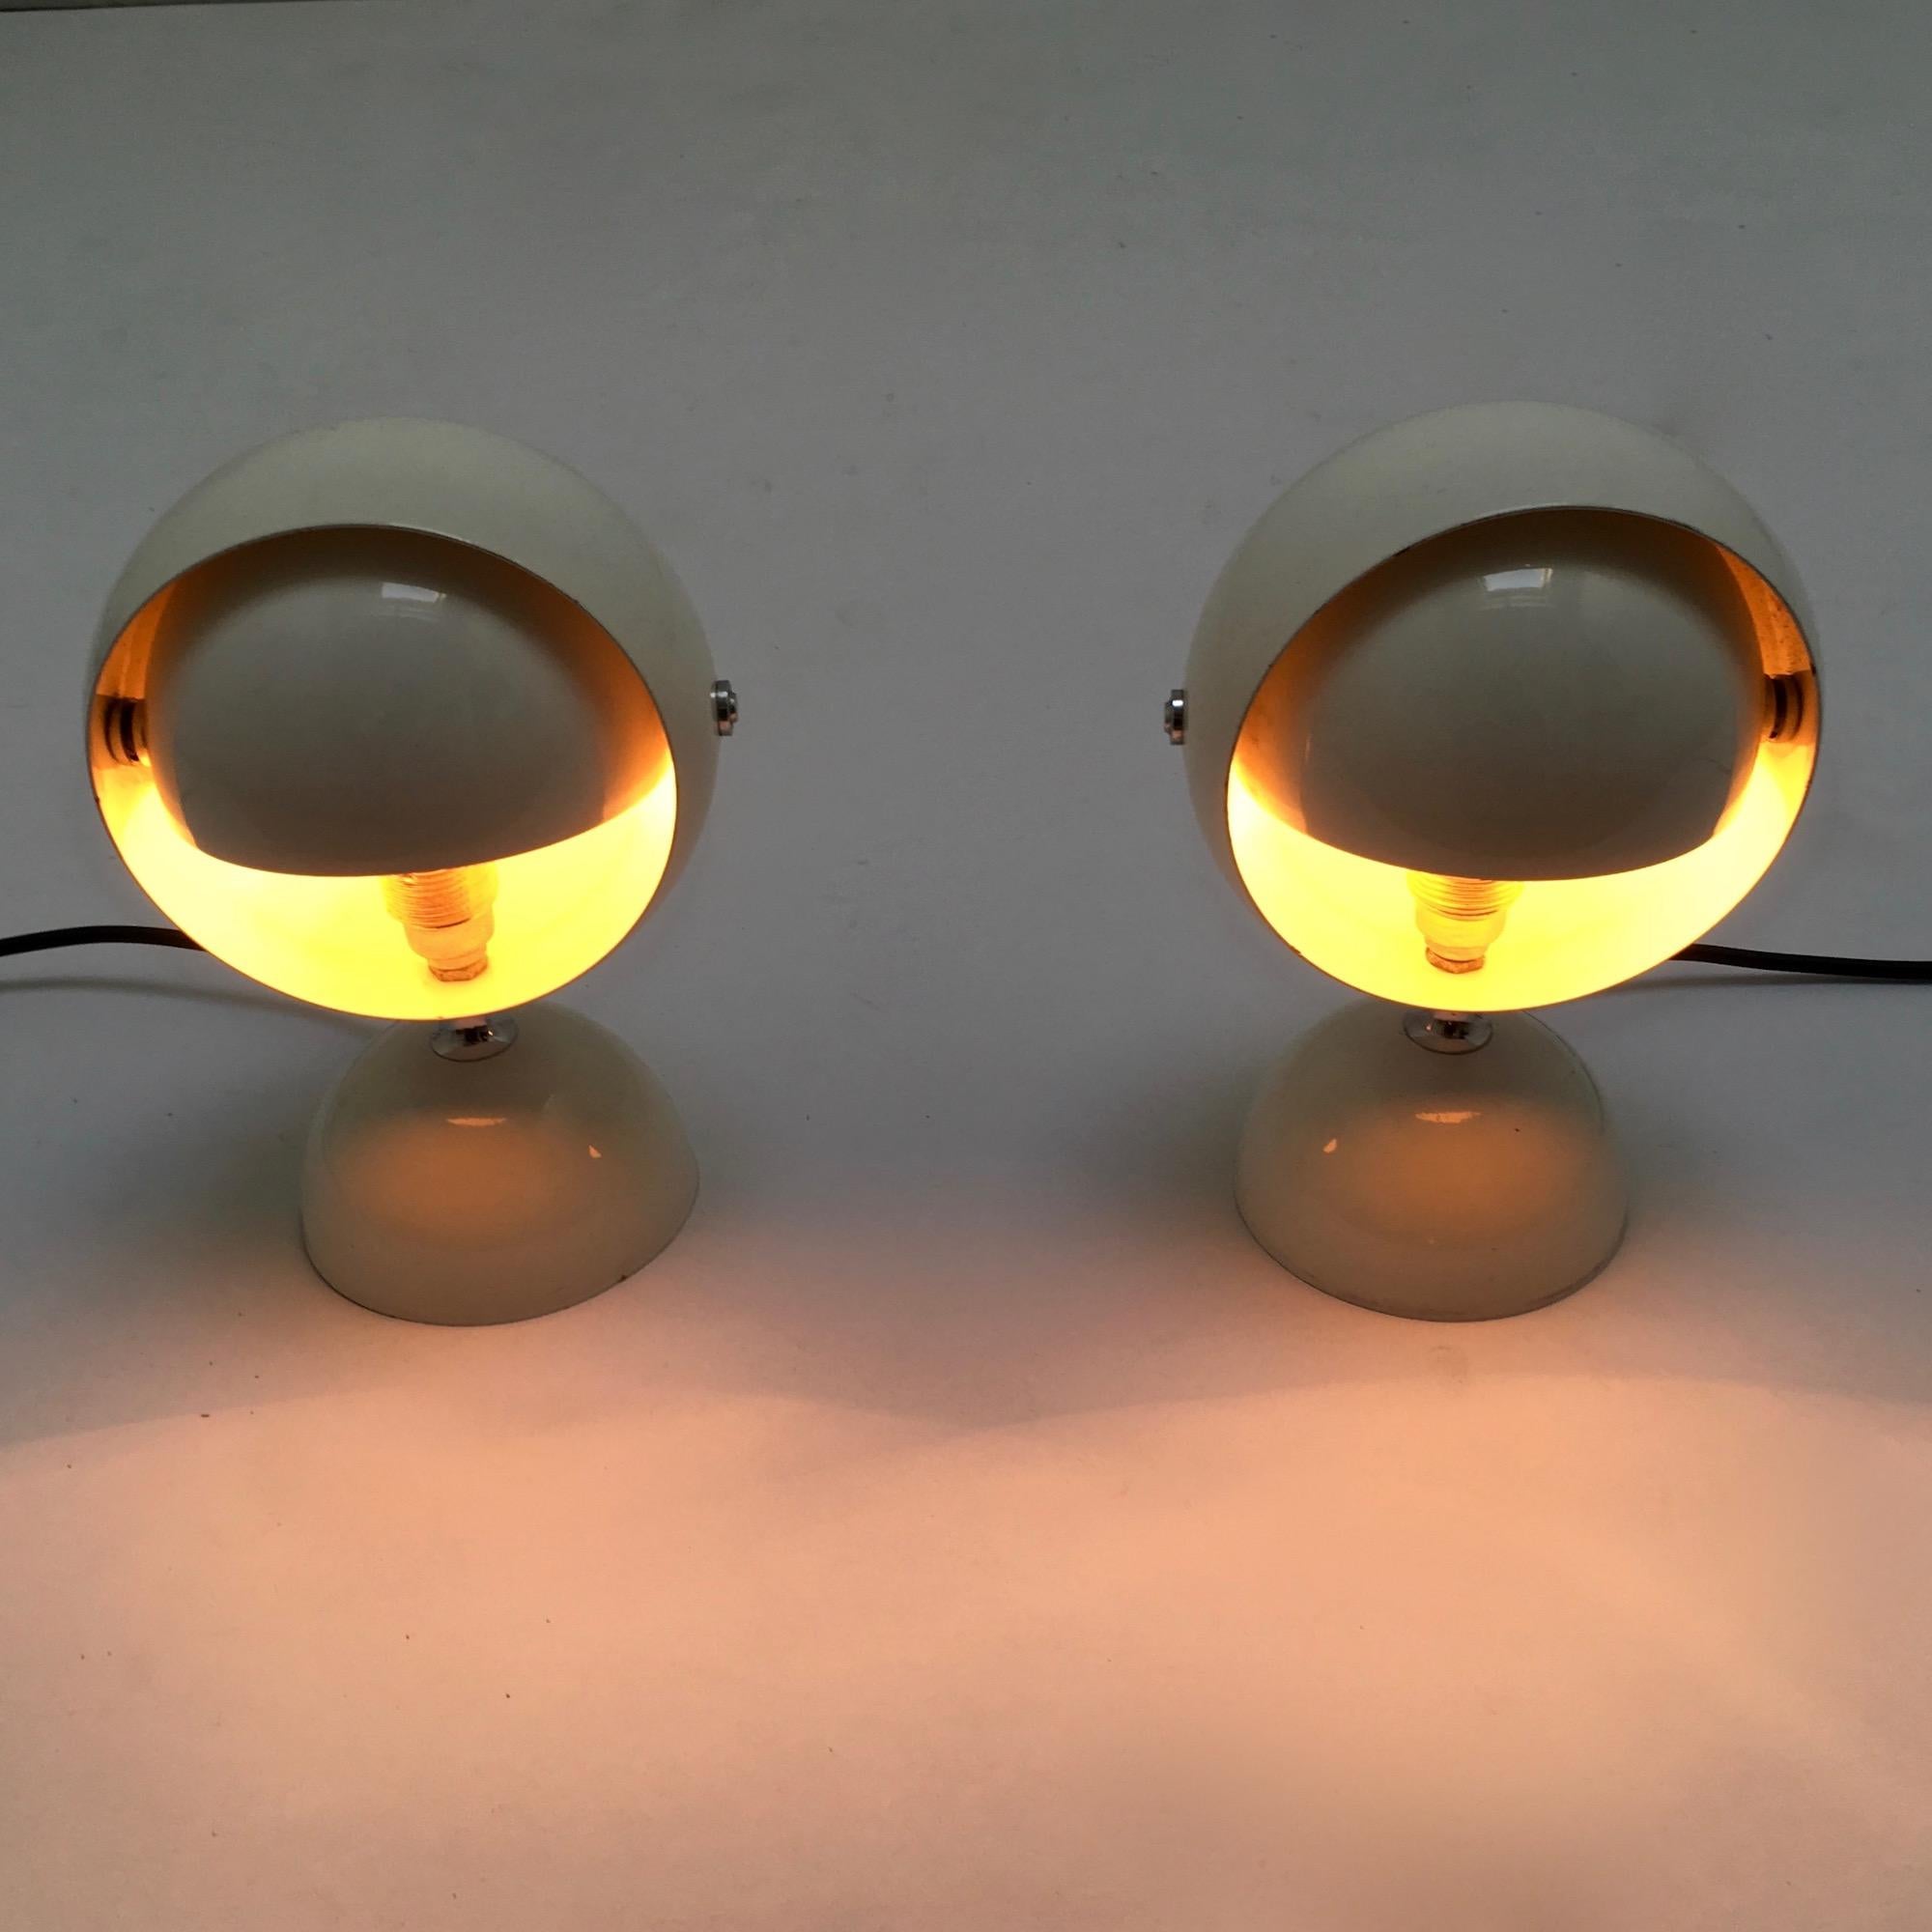 Painted Pair of 1970s Space Age Eye Ball Lamp